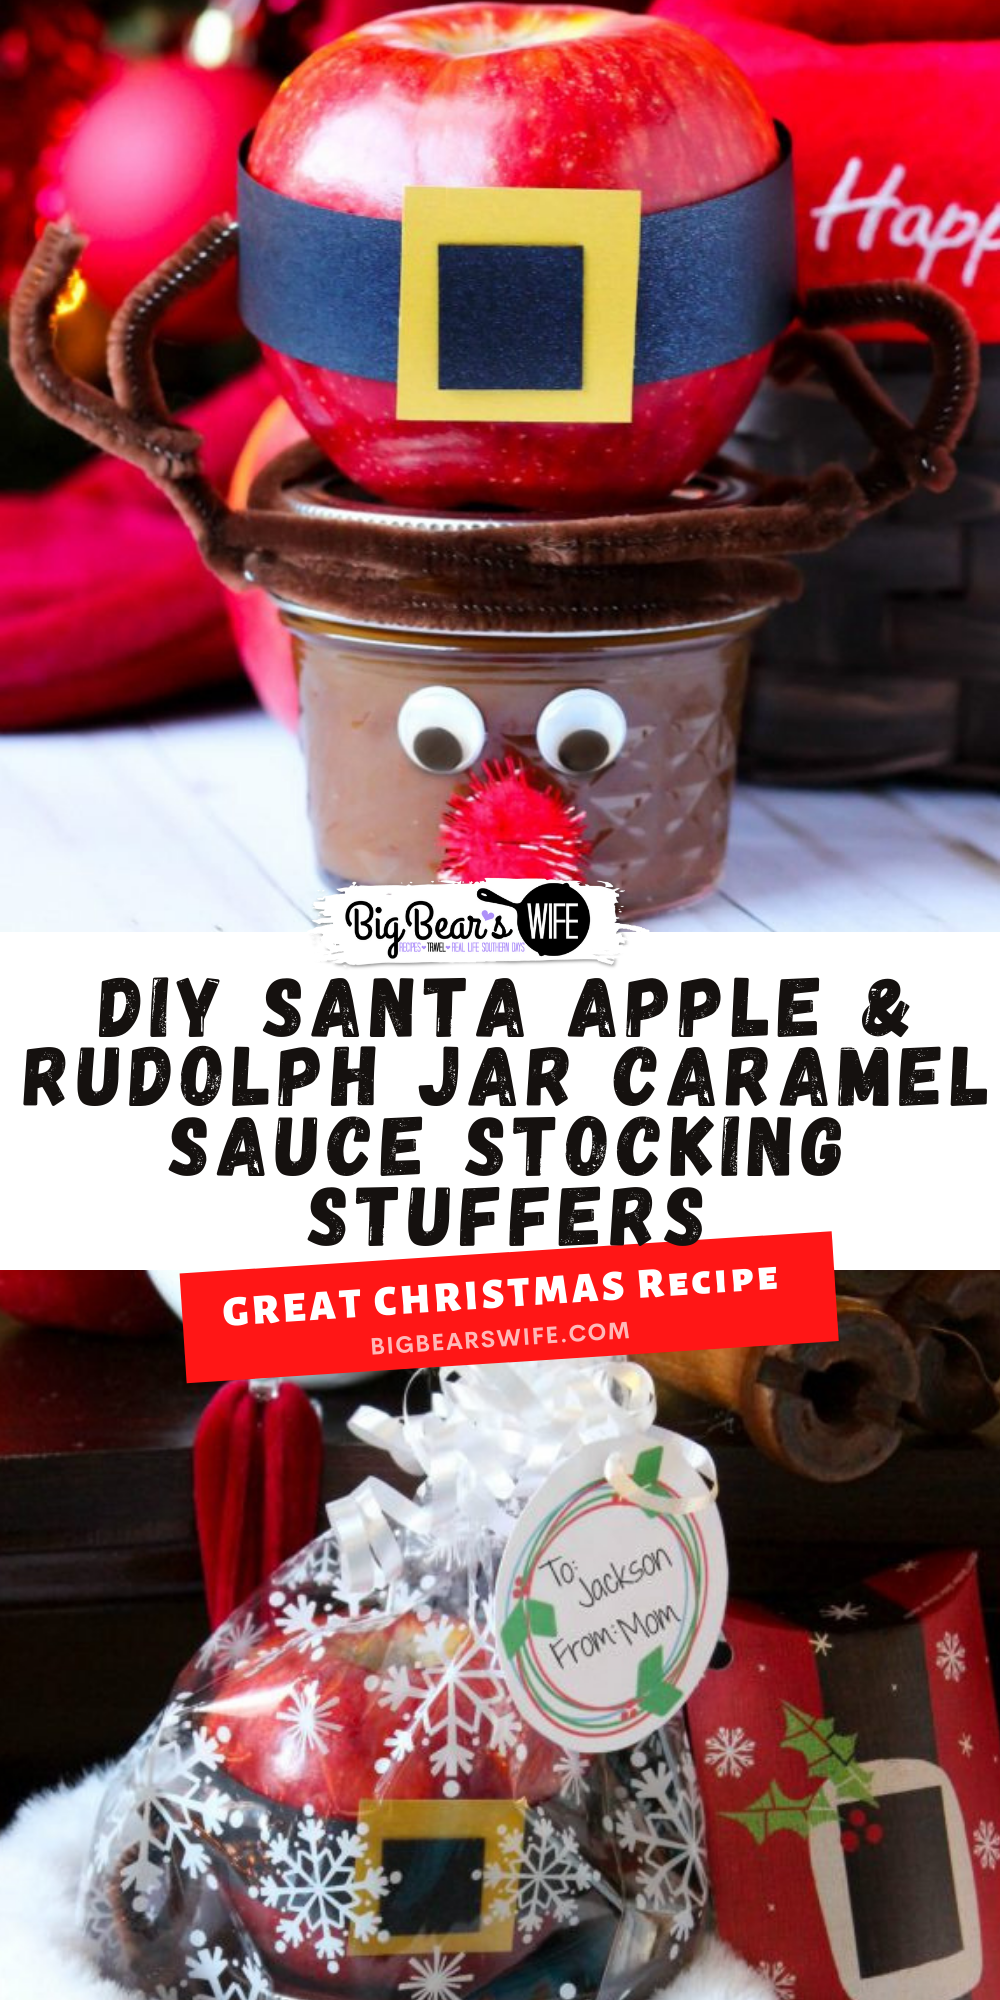 DIY Santa Apple & Rudolph Jar Caramel Sauce Stocking Stuffers - Looking for a cute and easy stocking stuffer? These DIY Santa Apple & Rudolph Jar Caramel Sauce Stocking Stuffers are perfect for kids and adults! They're easy to make and super cute! via @bigbearswife